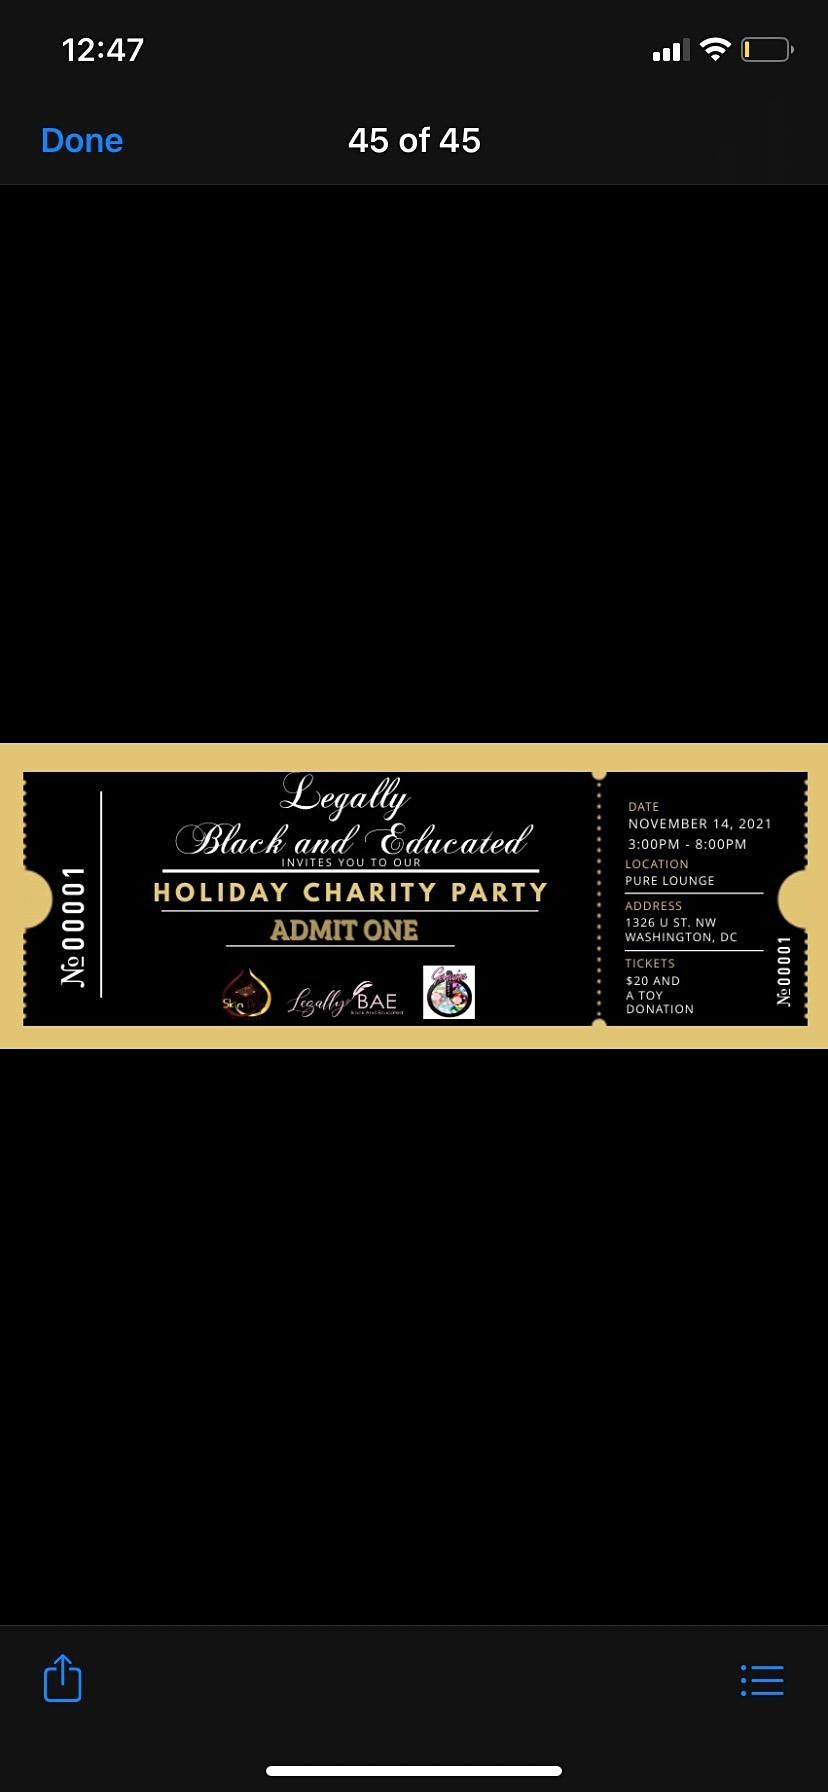 Legally Black and Educated Presents Our 1st Annual Holiday Charity Party